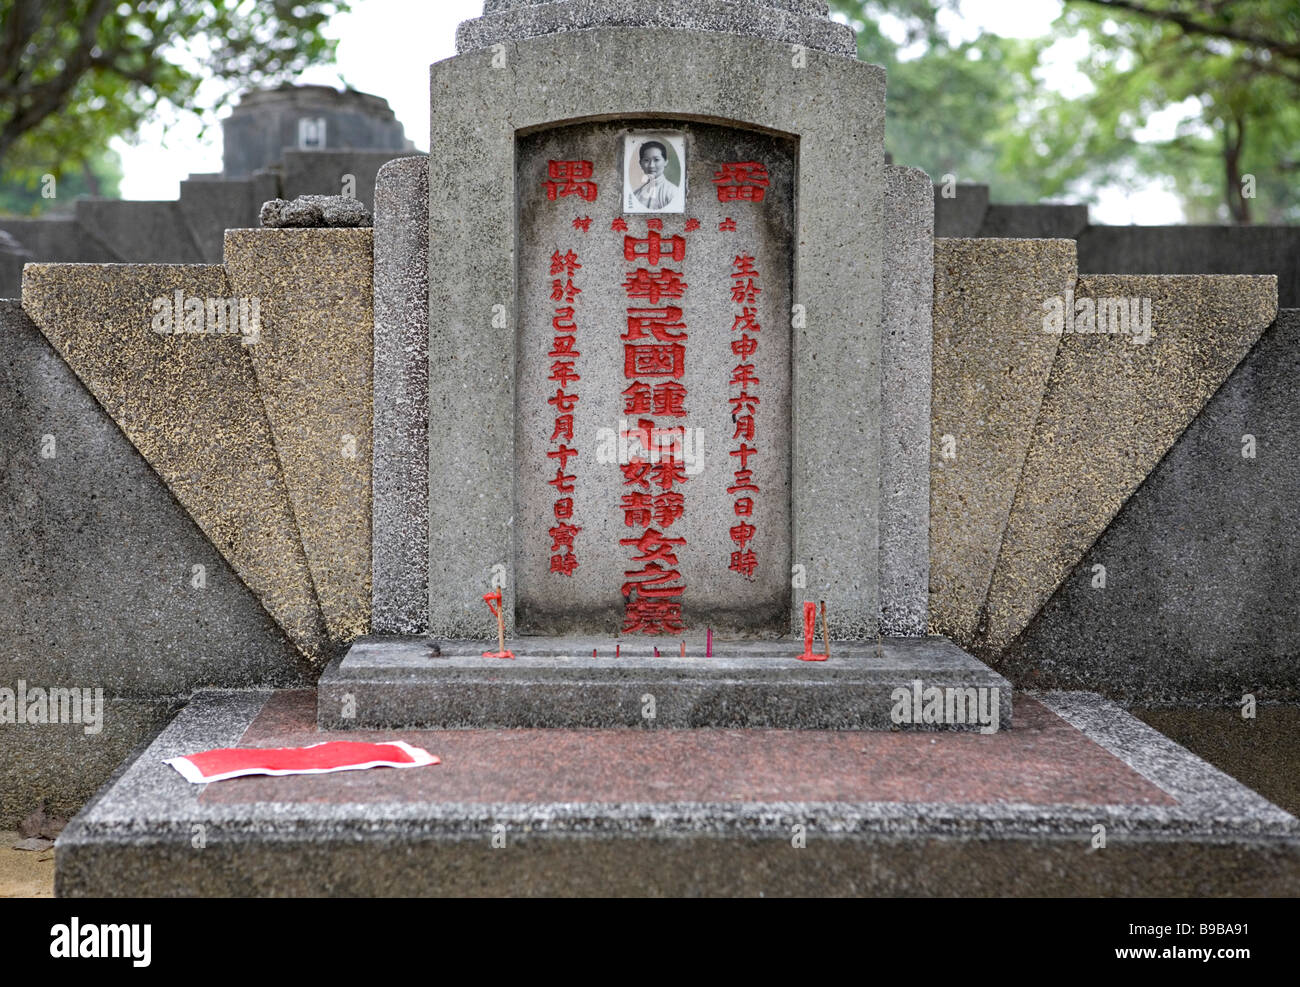 Chinese cemetary in Malaysia during April (Qing Ming festival). Stock Photo